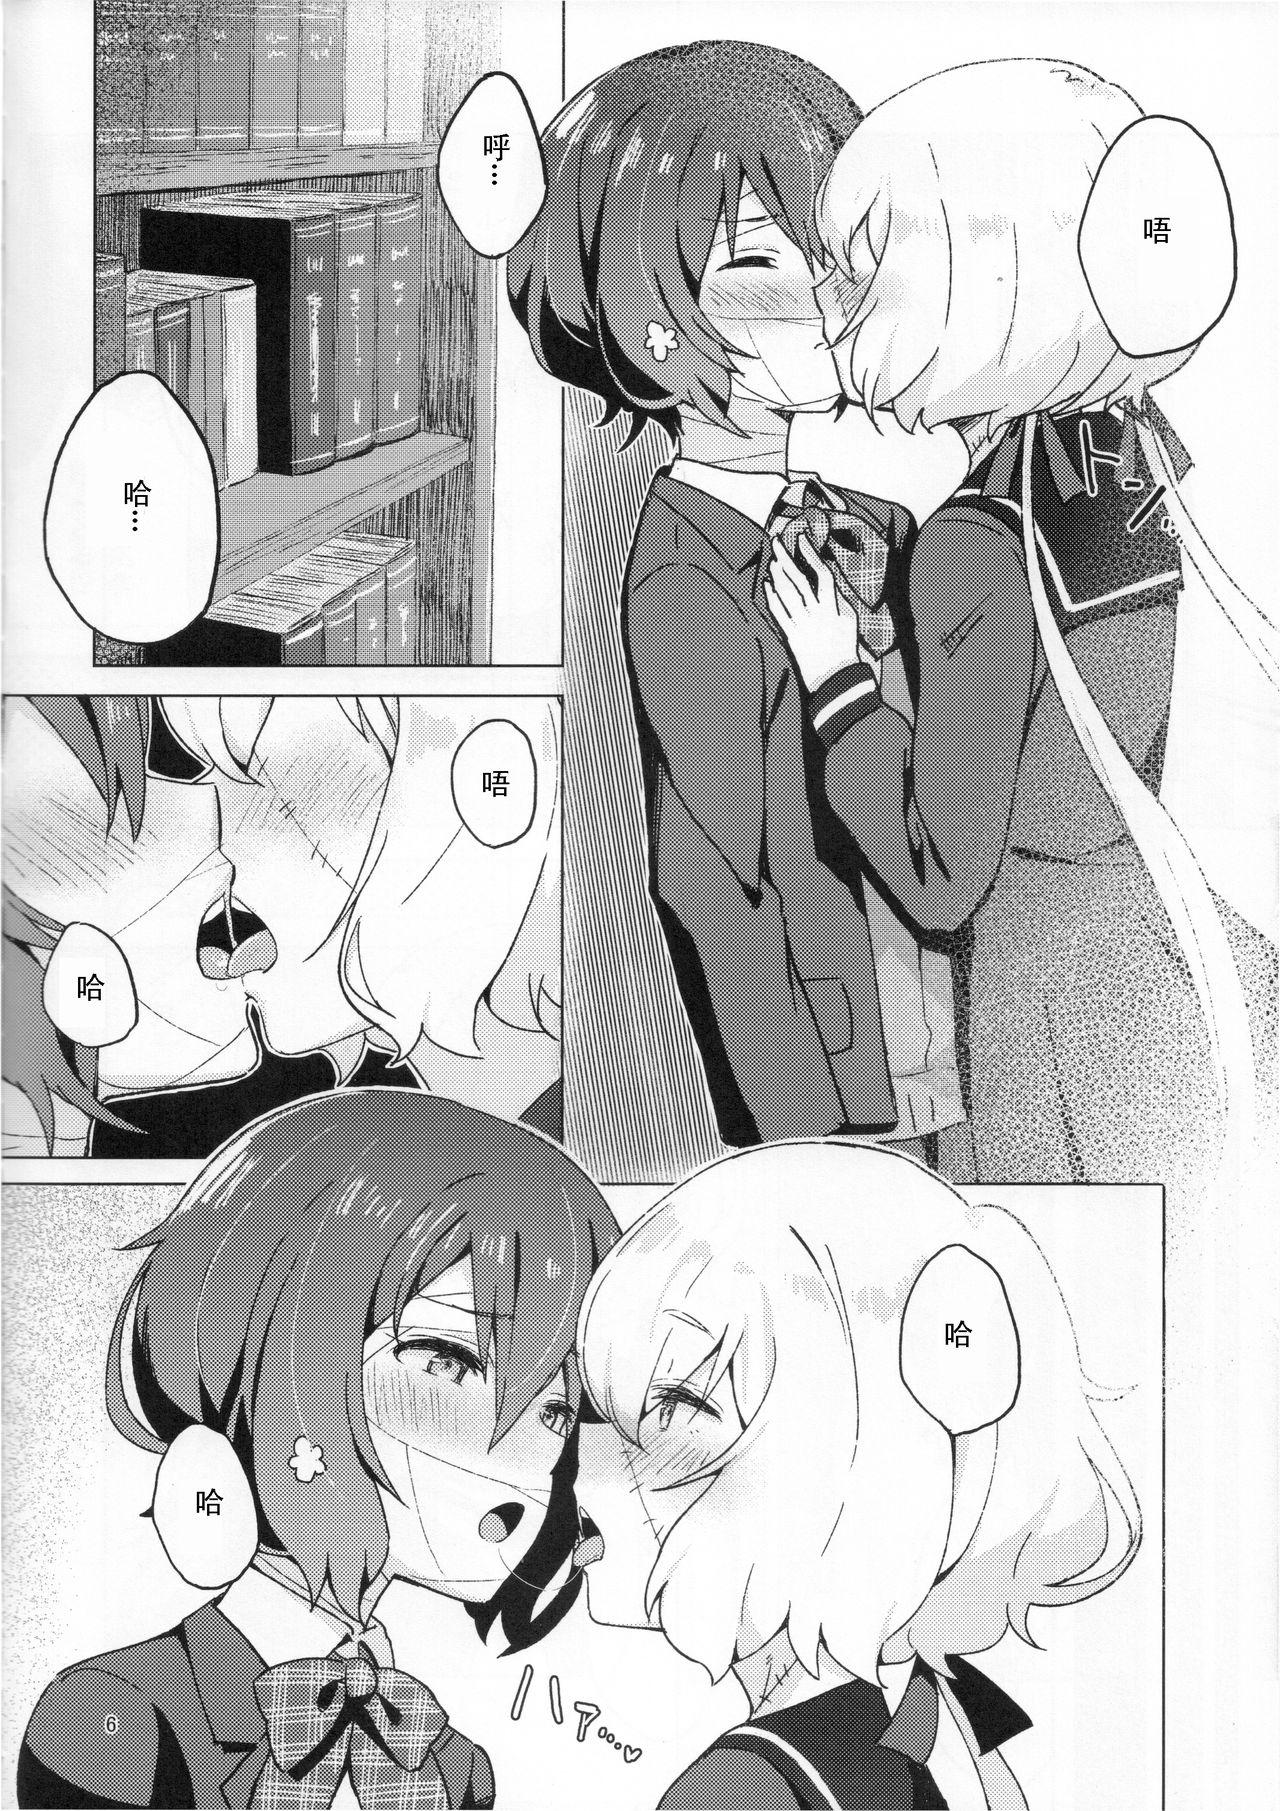 18 Year Old Pillow Color - Zombie land saga Spank - Page 7